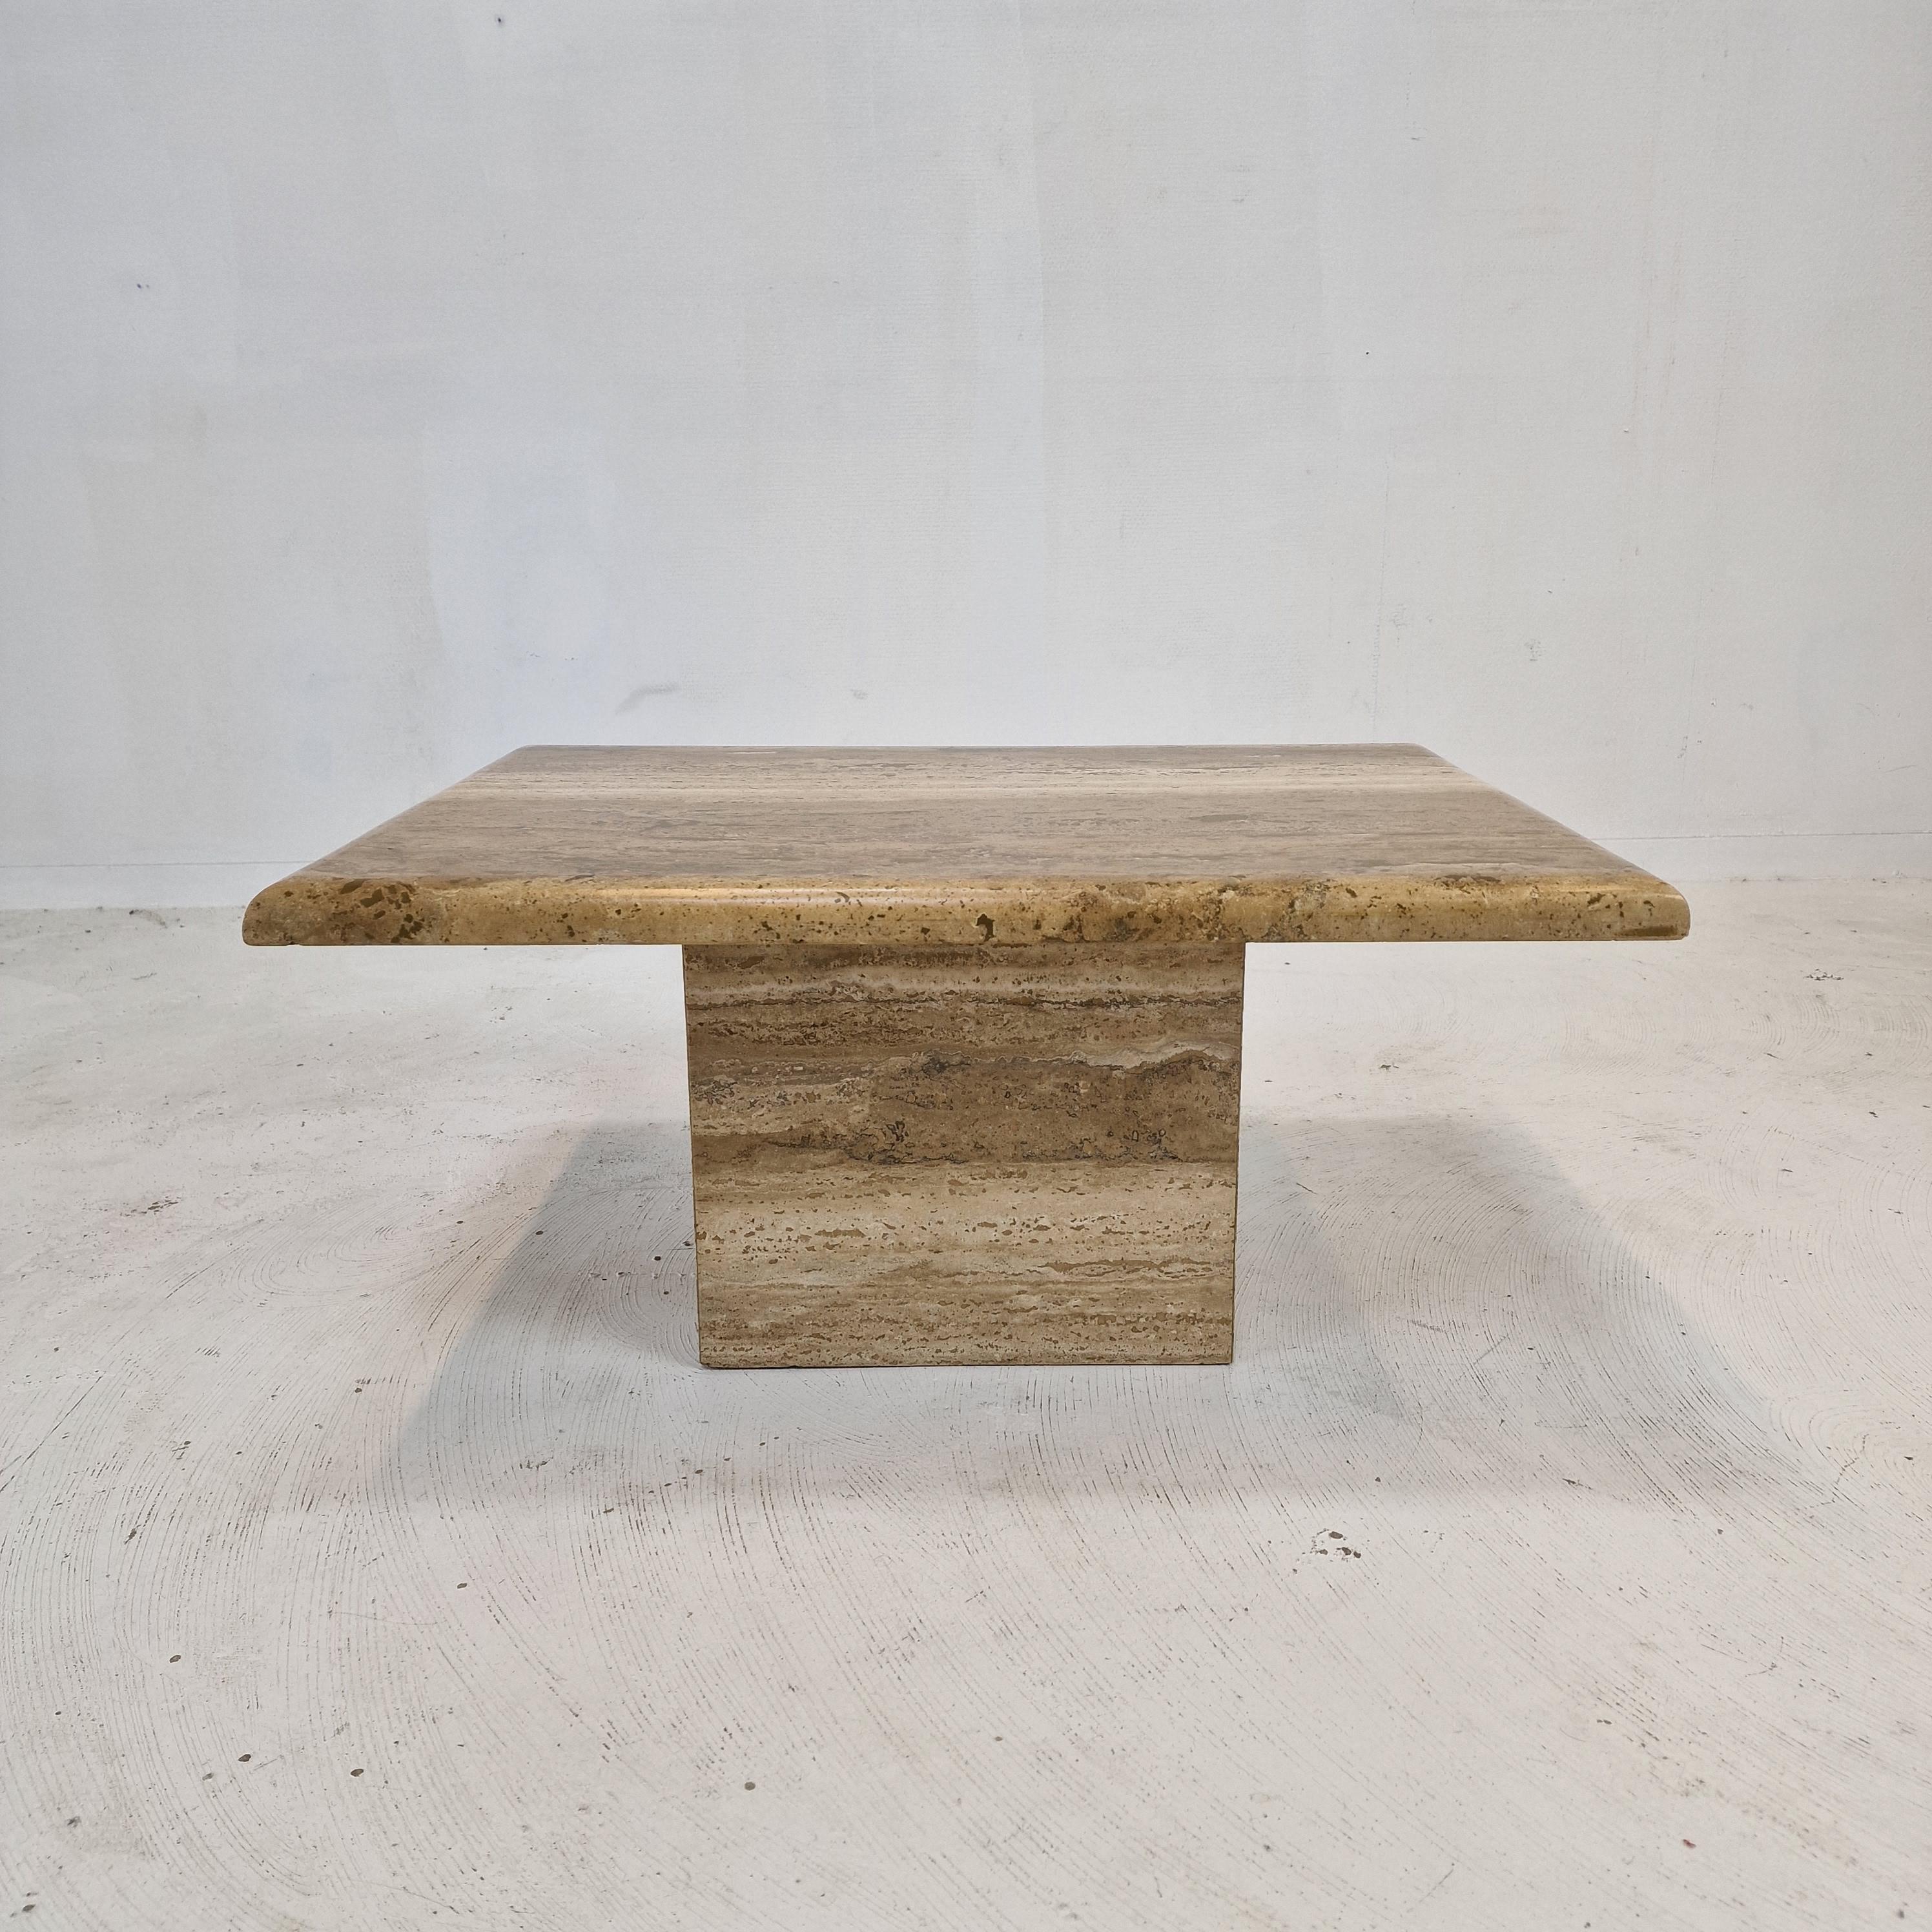 Hand-Crafted Italian Coffee or Side Table in Travertine, 1980s For Sale